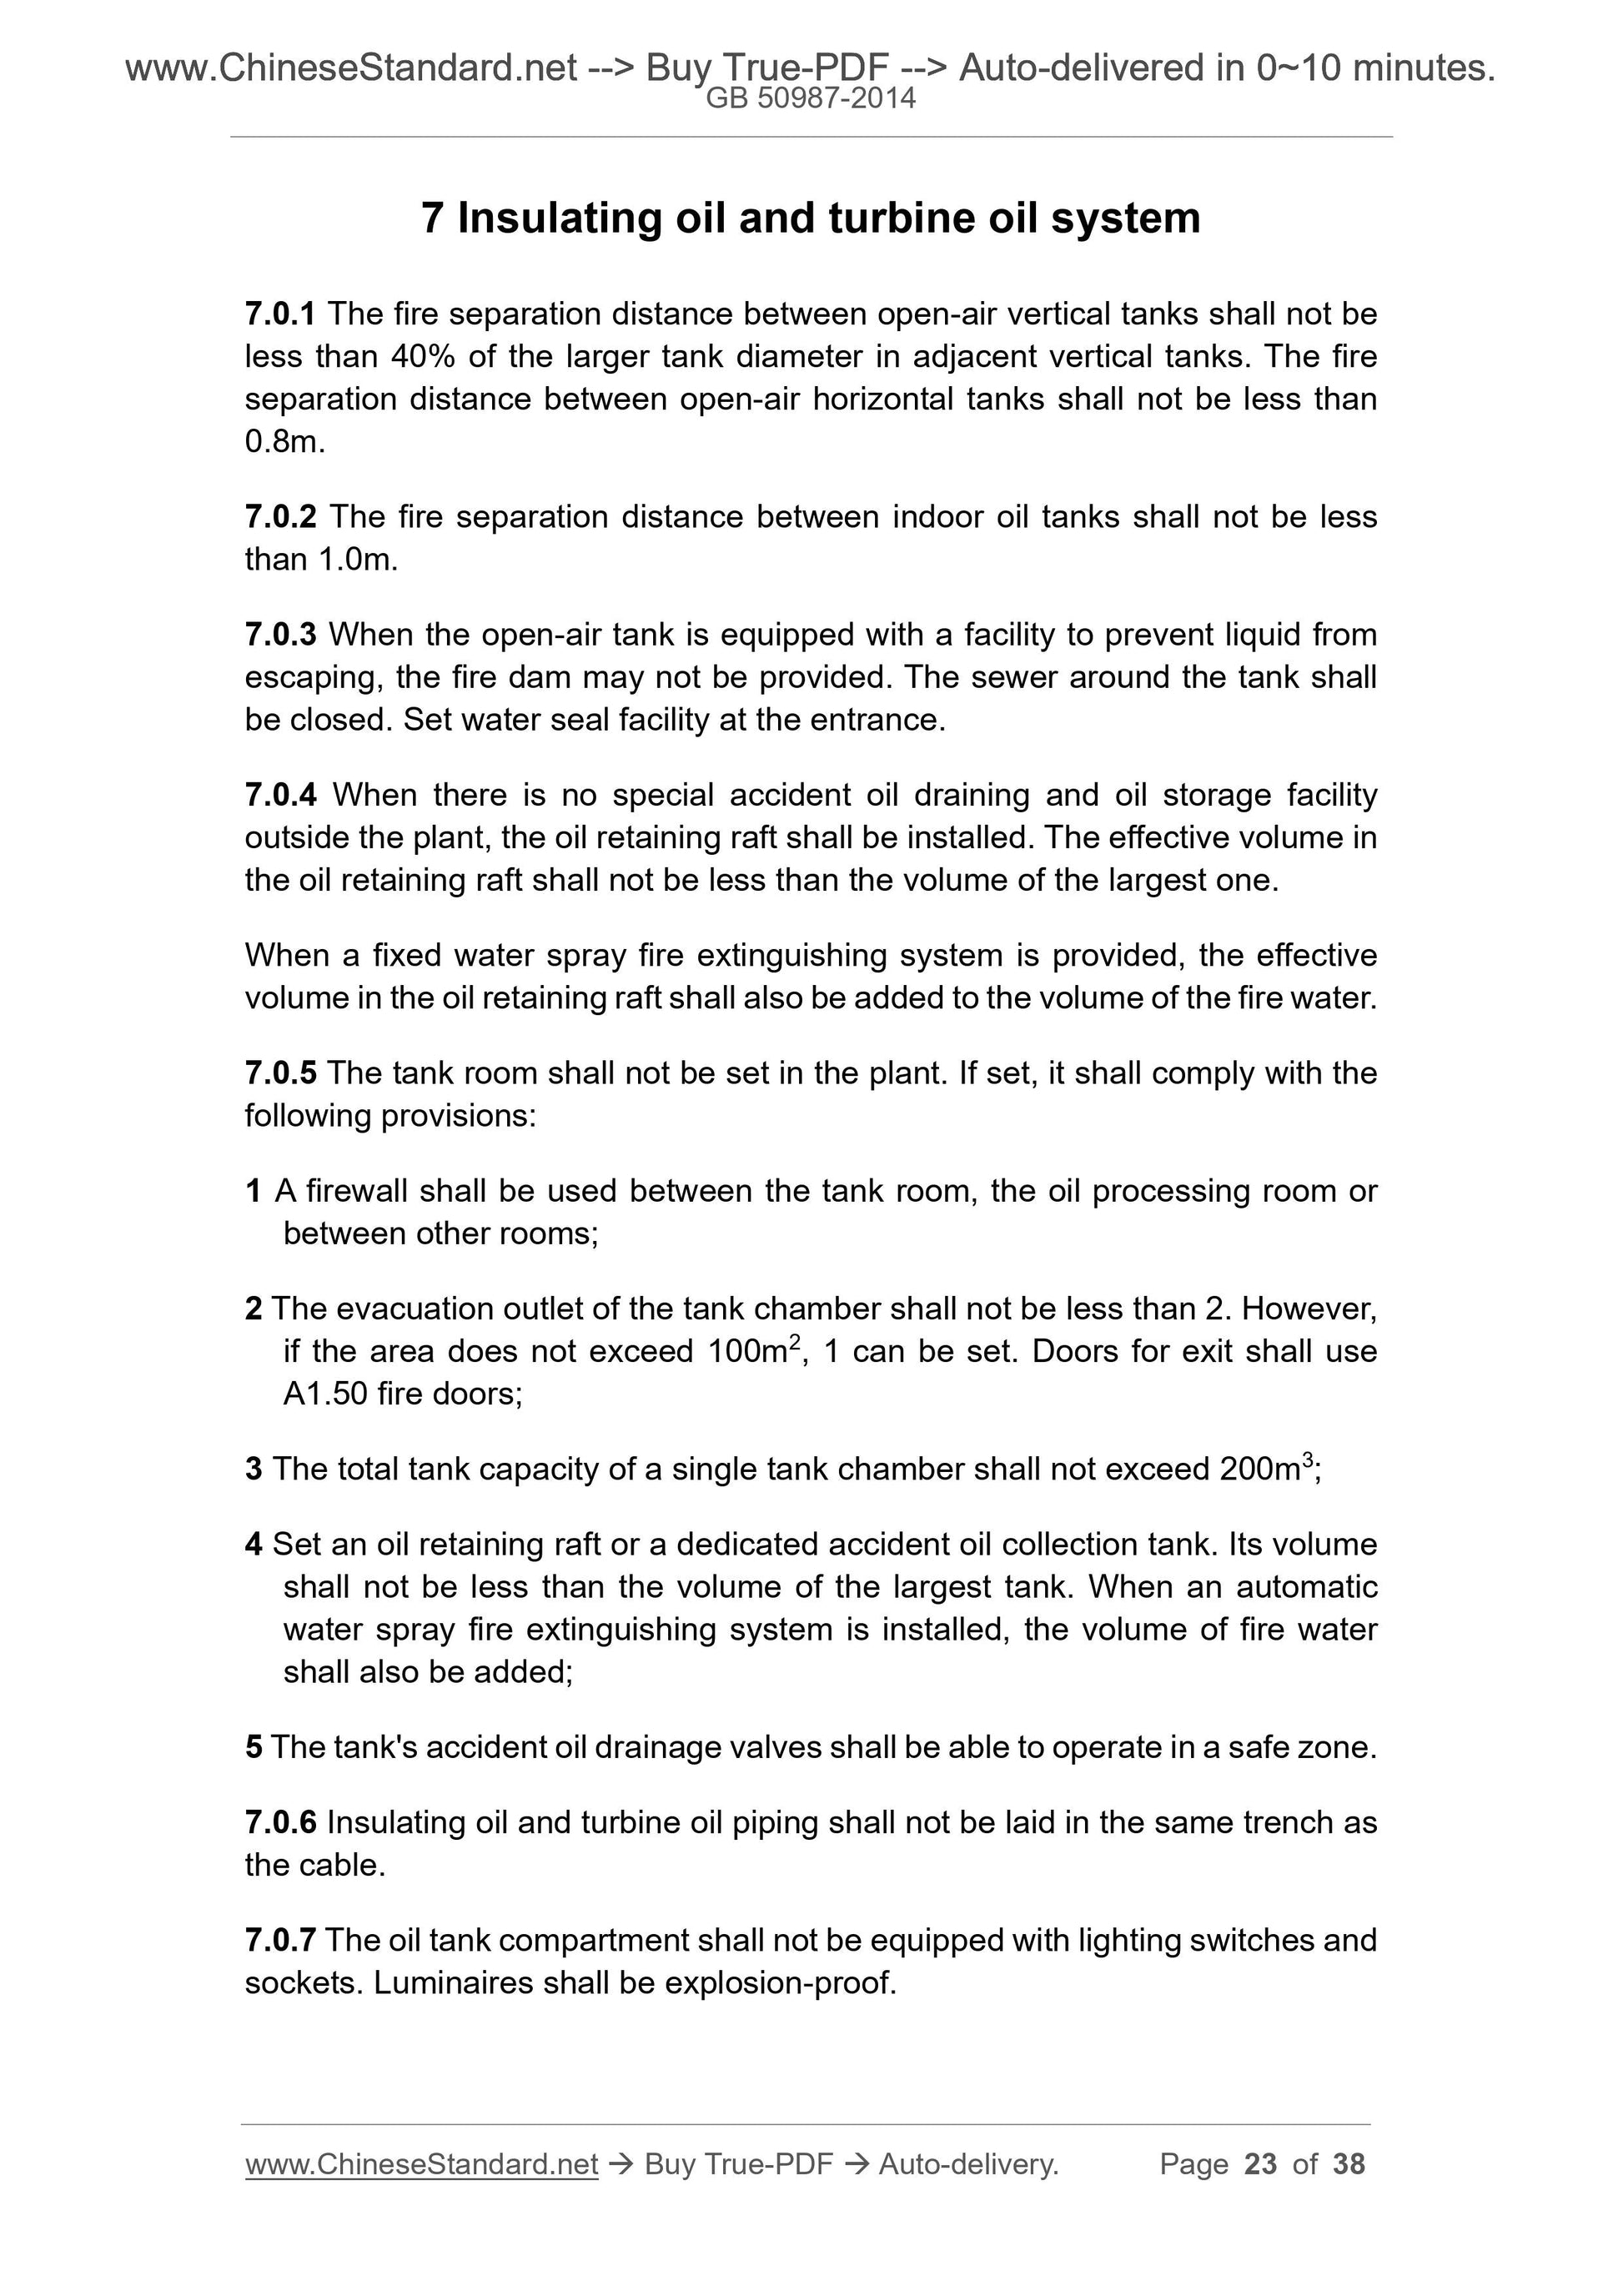 GB 50987-2014 Page 10